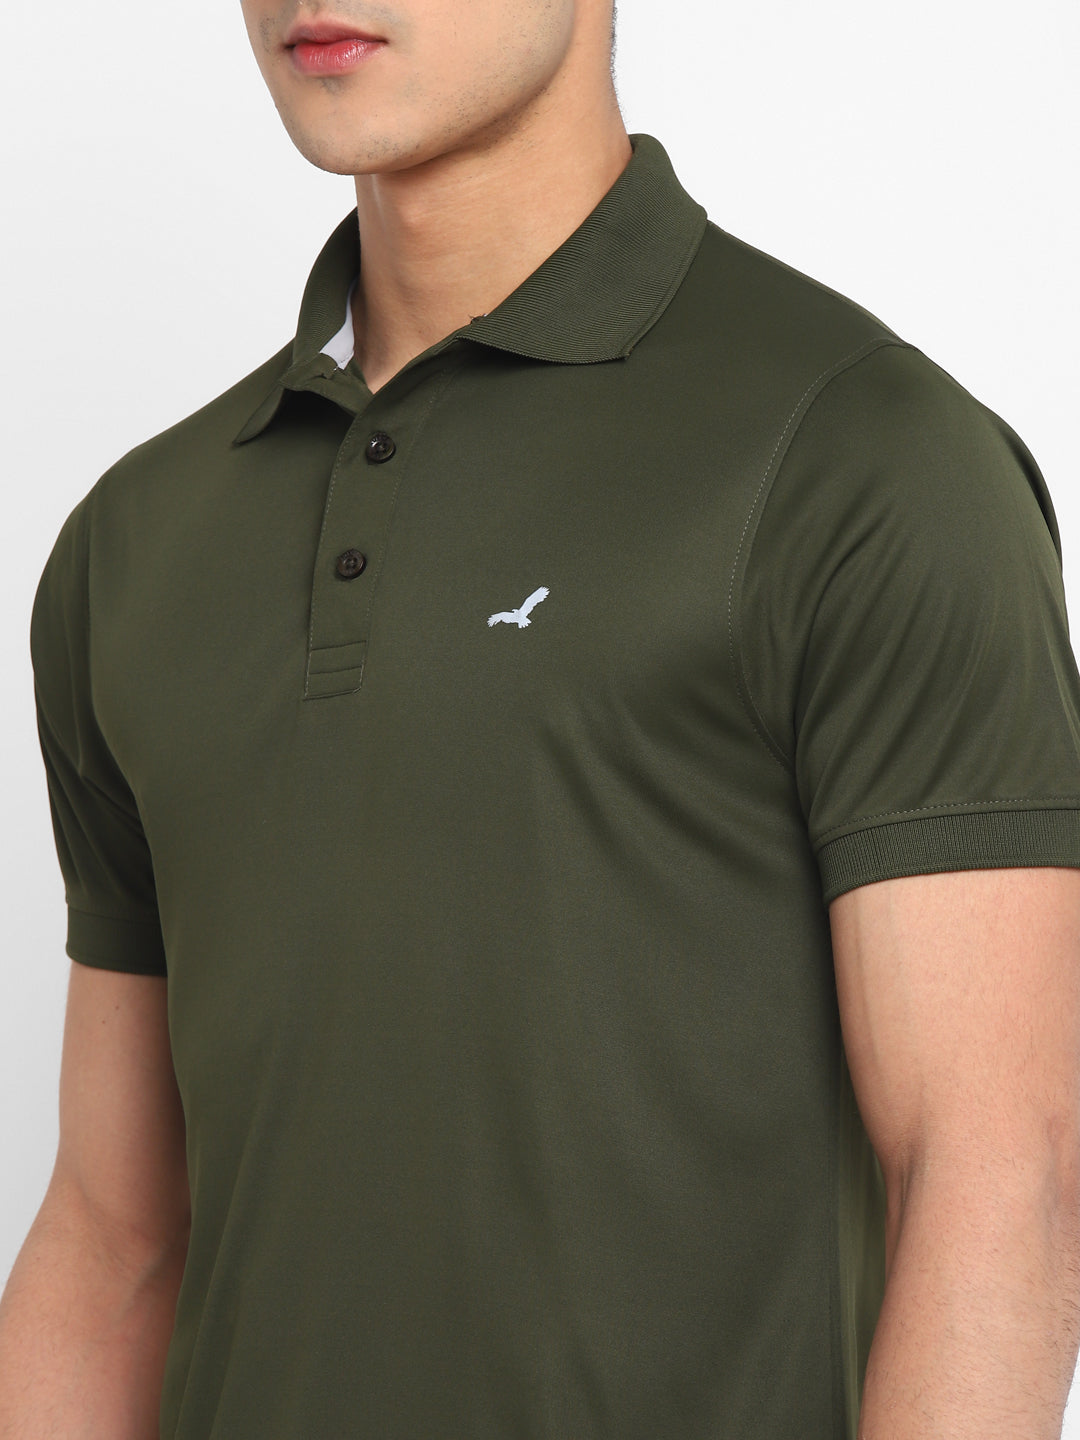 Kooltex Sports Polo T-Shirts For Men with Reflective Details - Dark Olive